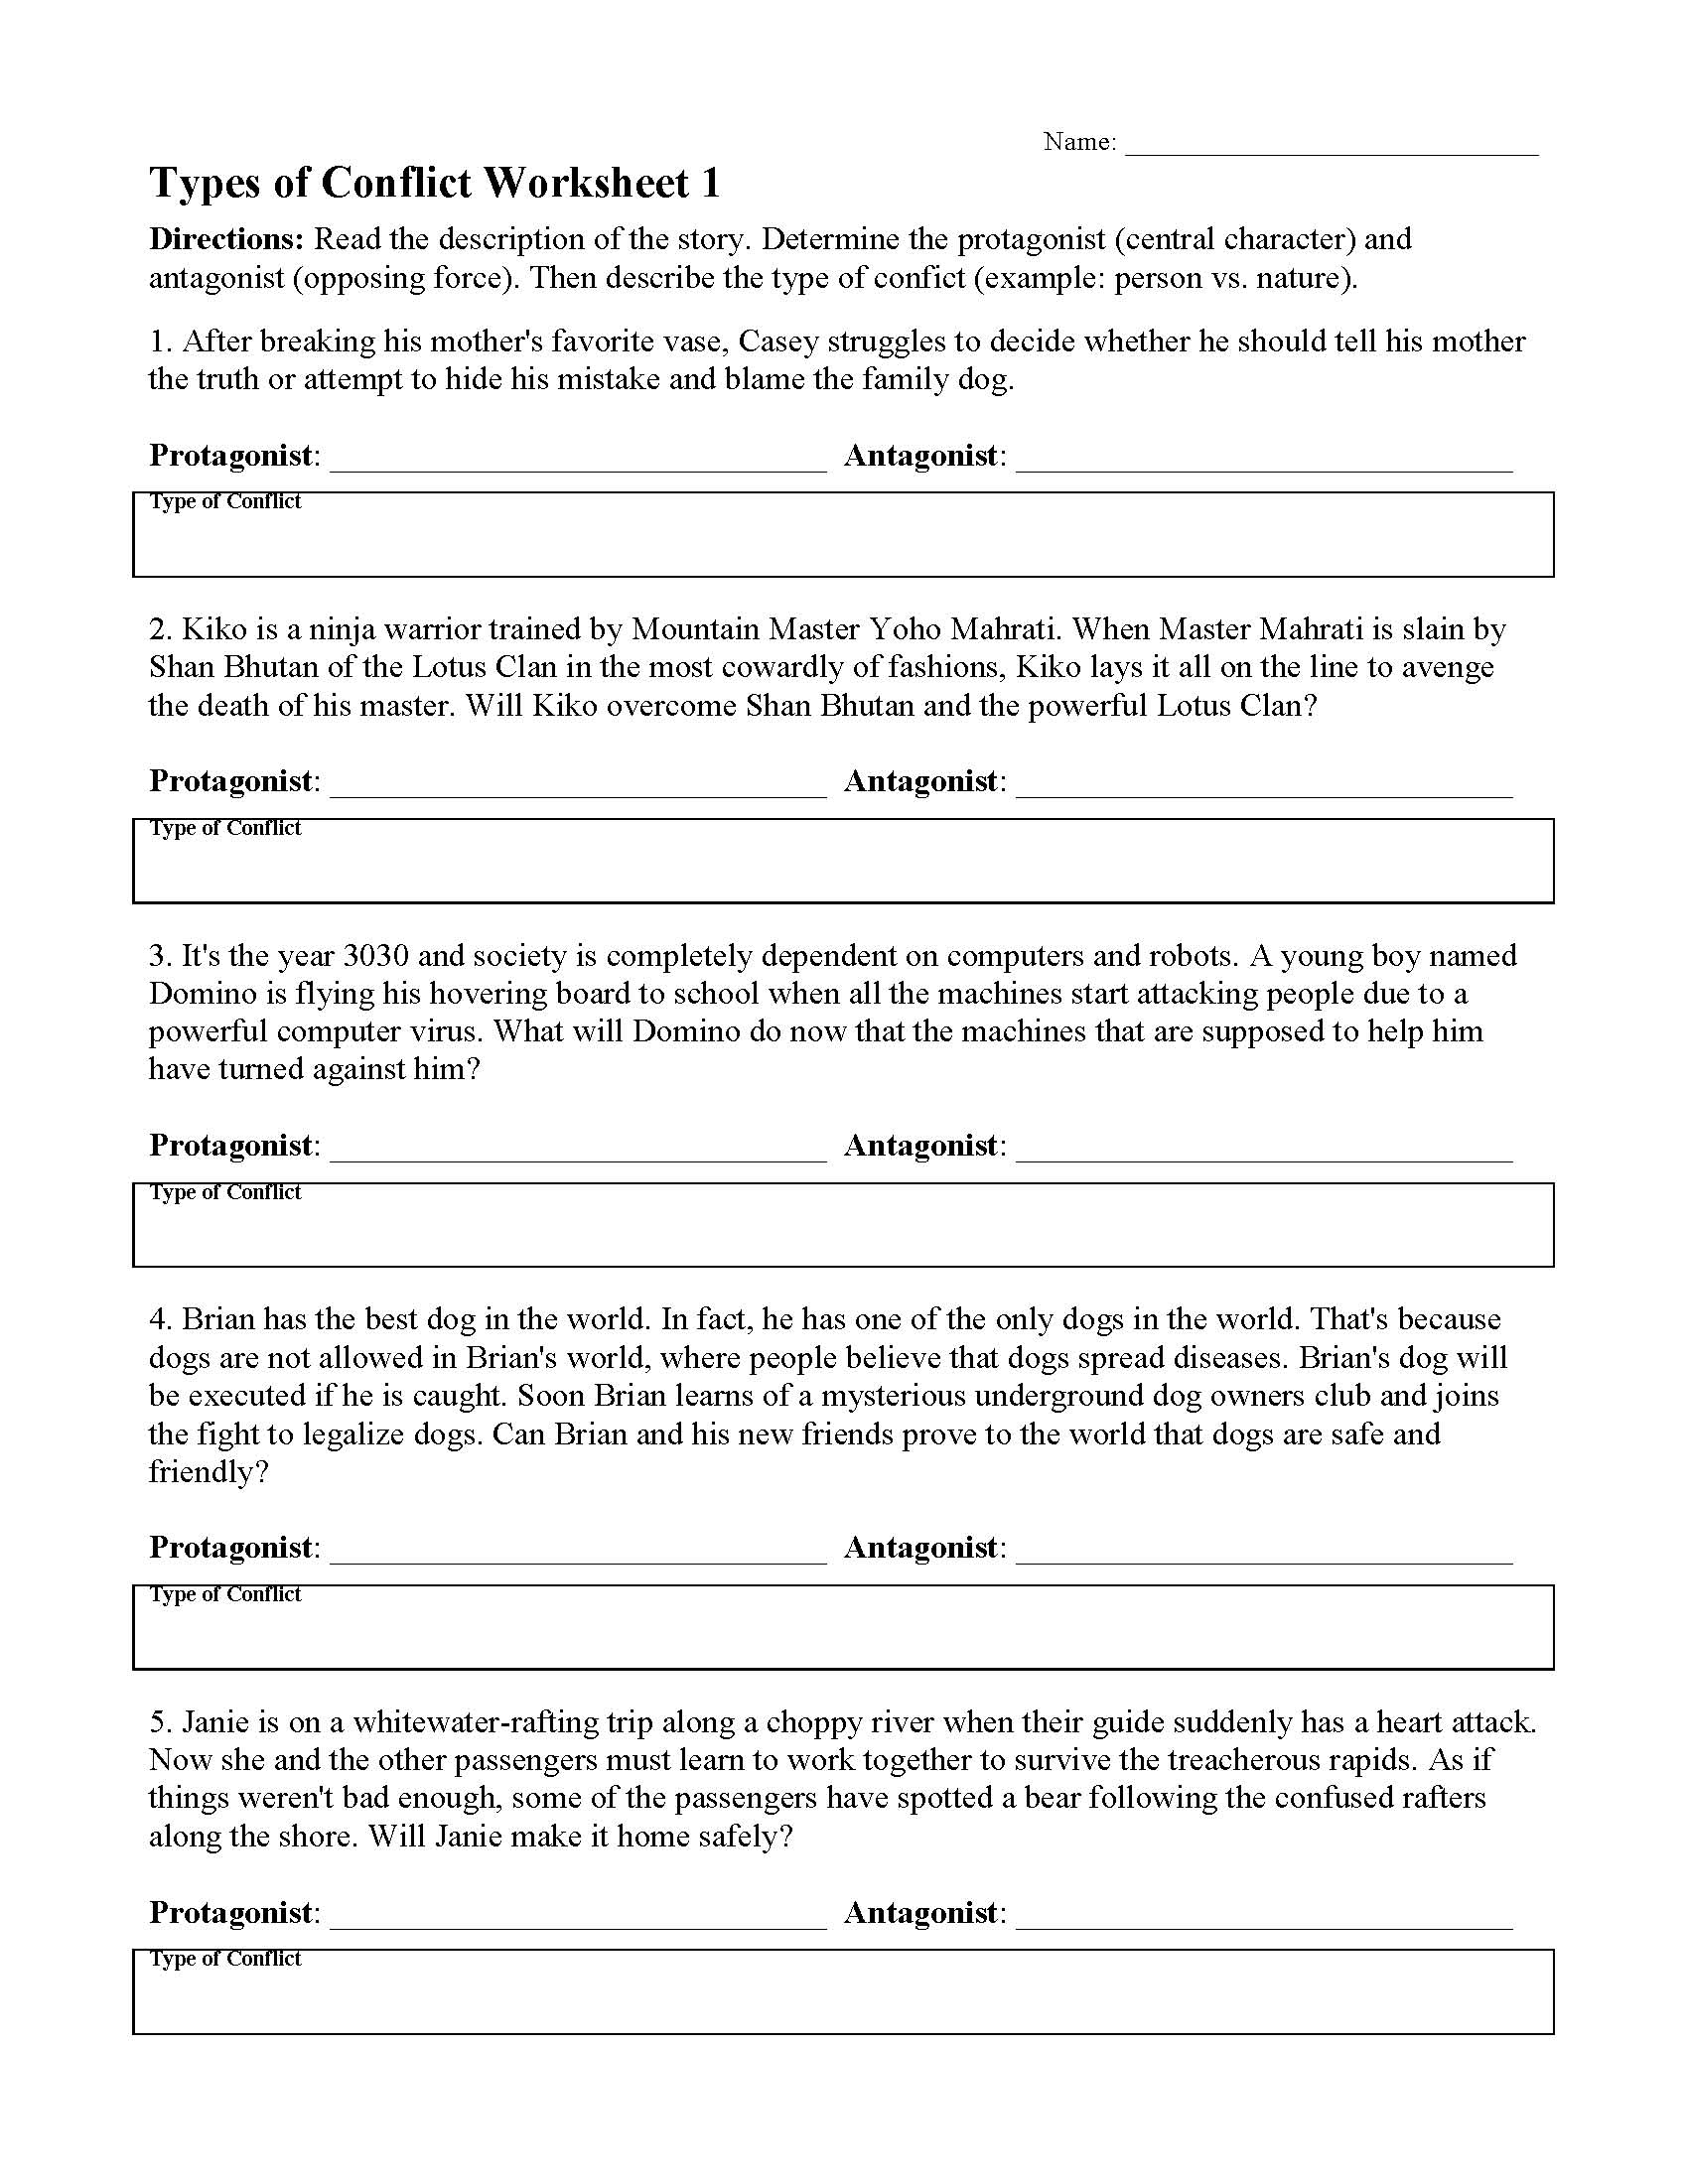 Types Of Conflict Worksheet 1 Reading Activity